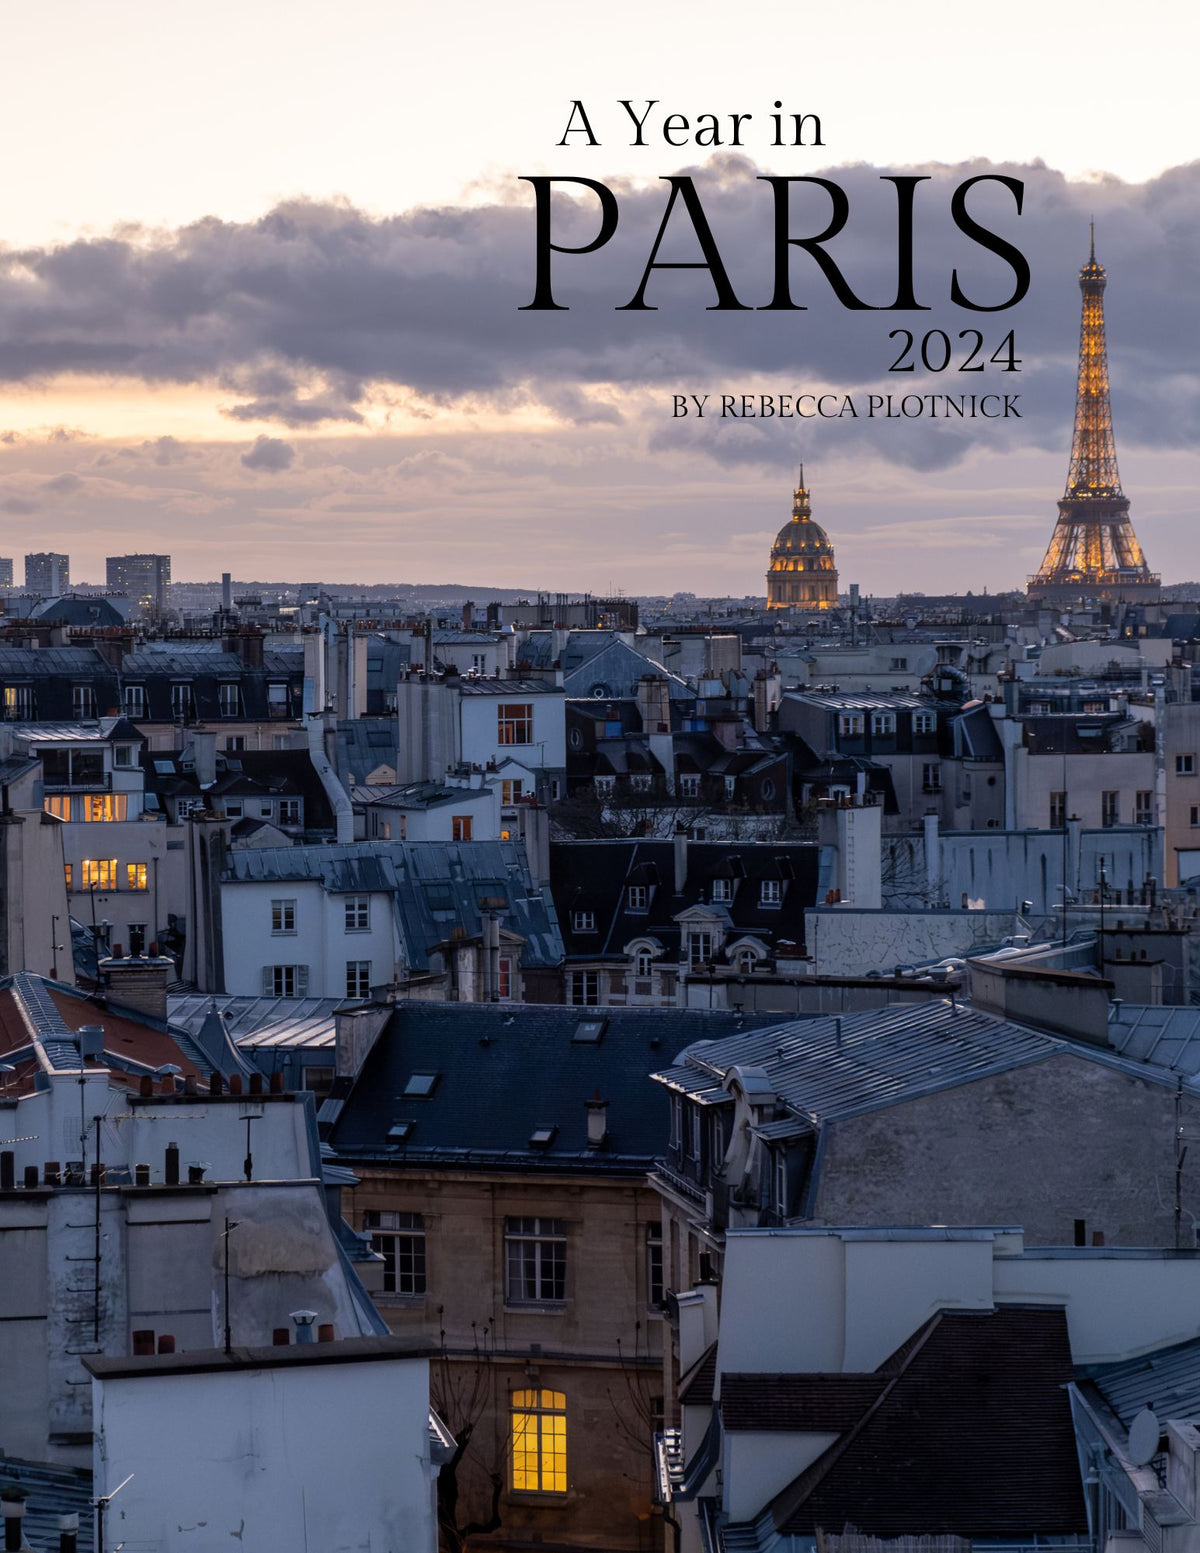 A Year in Paris 2024 Calendar and Holiday Notecard Set of 10